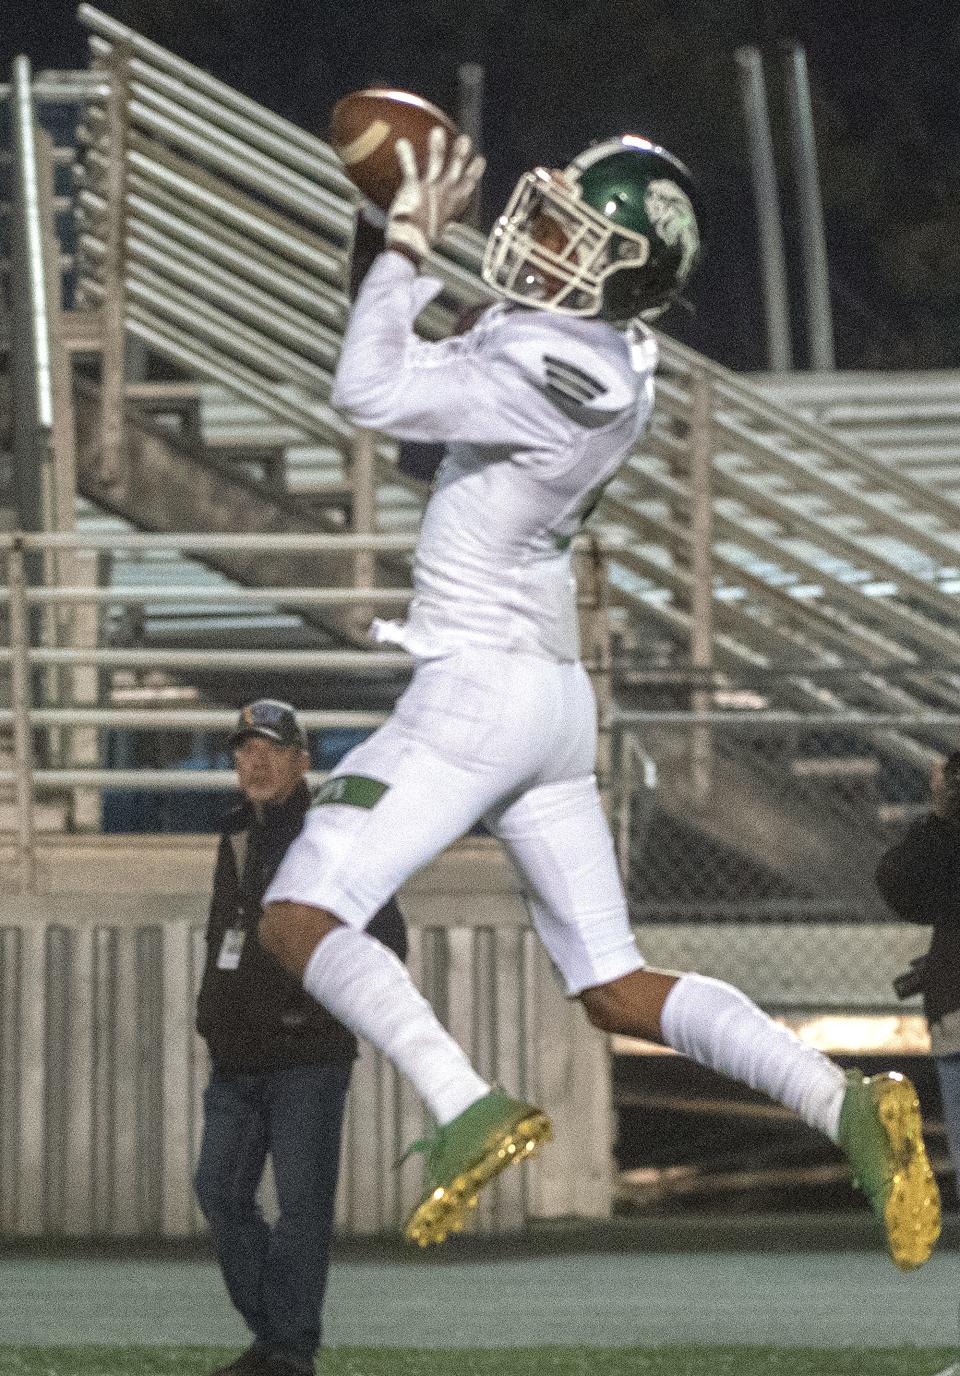 Manteca's Zion Allen makes the game winning catch during the Sac-Joaquin Section Division III championship game against Oakdale at St. Mary's High School in Stockton. Manteca won 35-28.